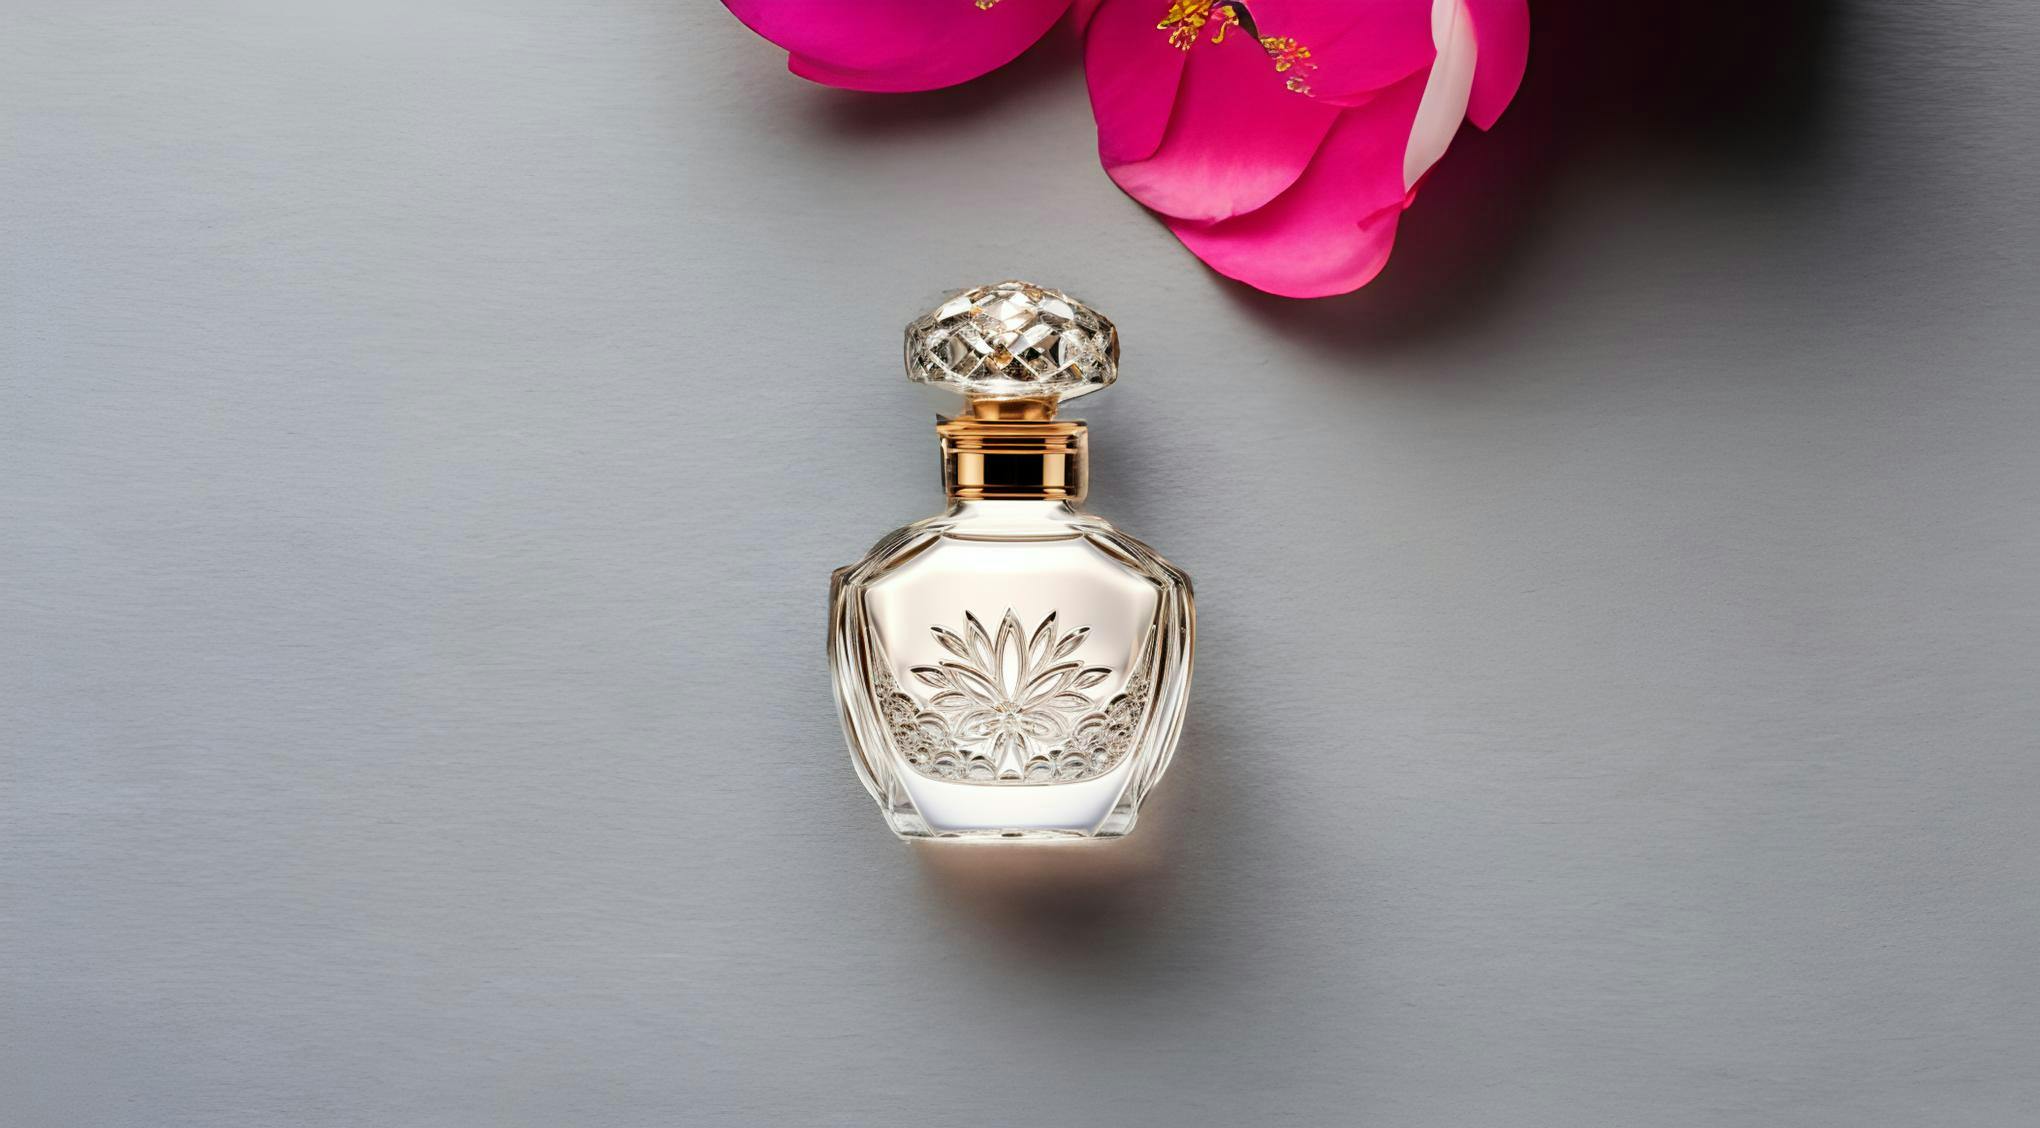 Perfume bottle with pink and gold flowers